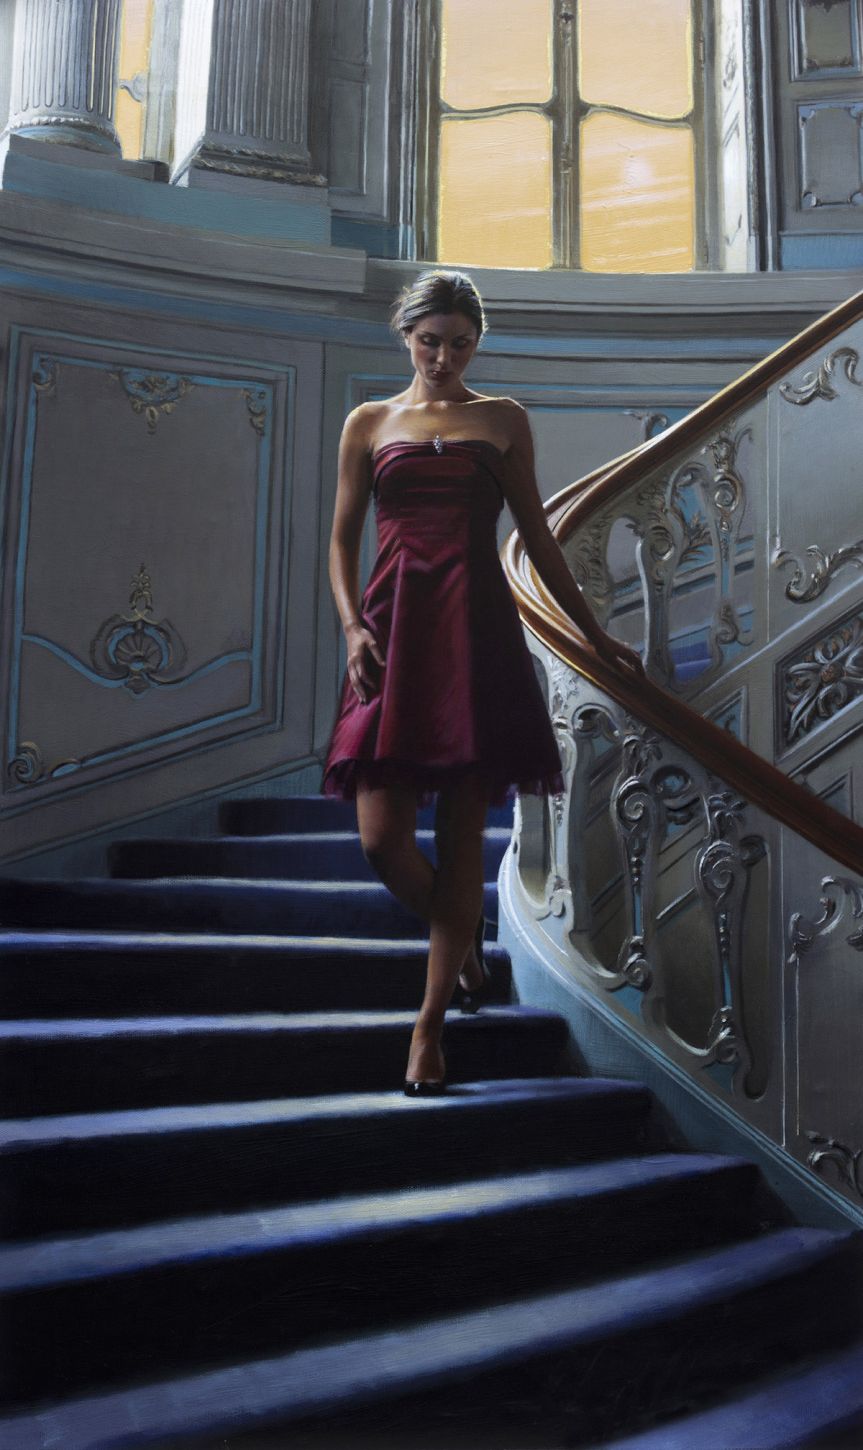 rob-hefferan-reflection-in-thought